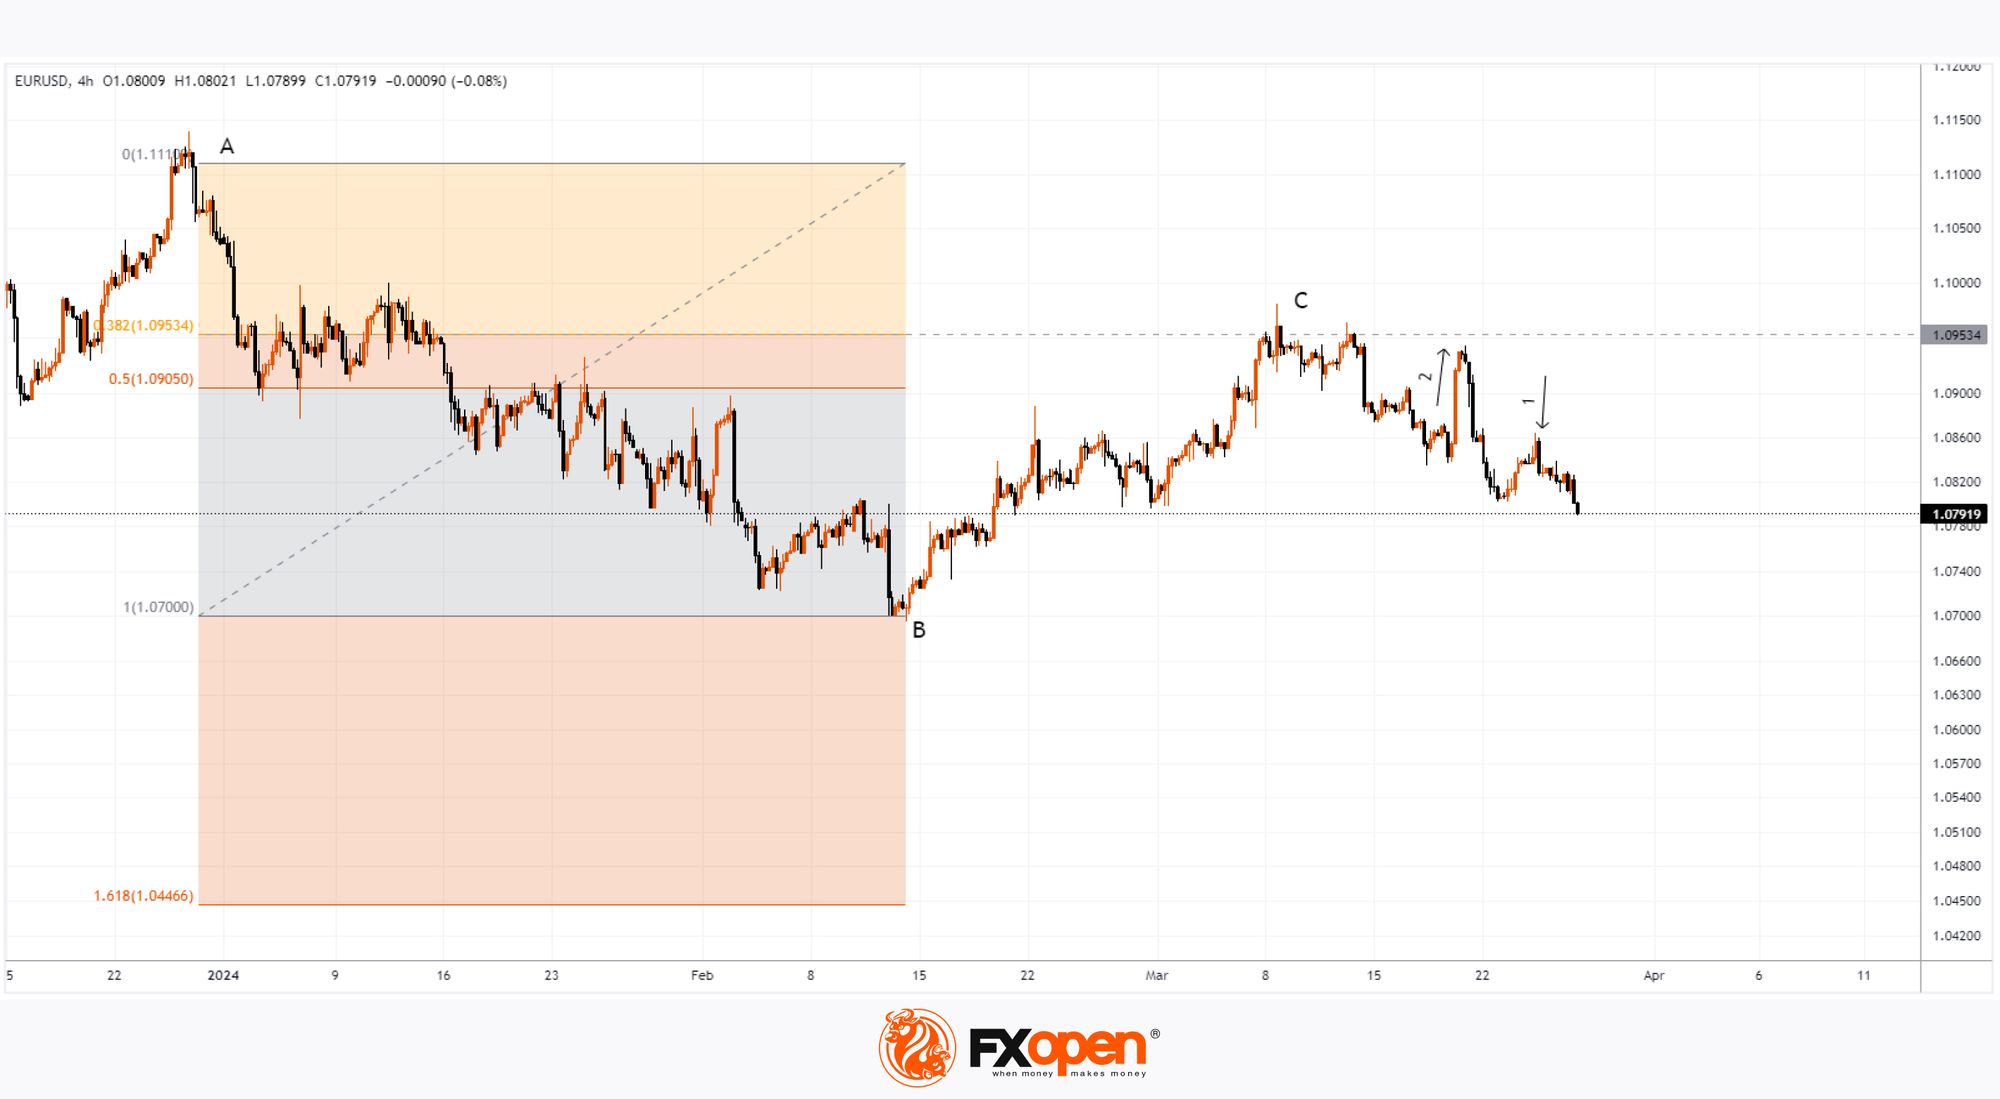 EUR/USD Analysis: The Price Today Has Set Its Minimum Since the Beginning of March